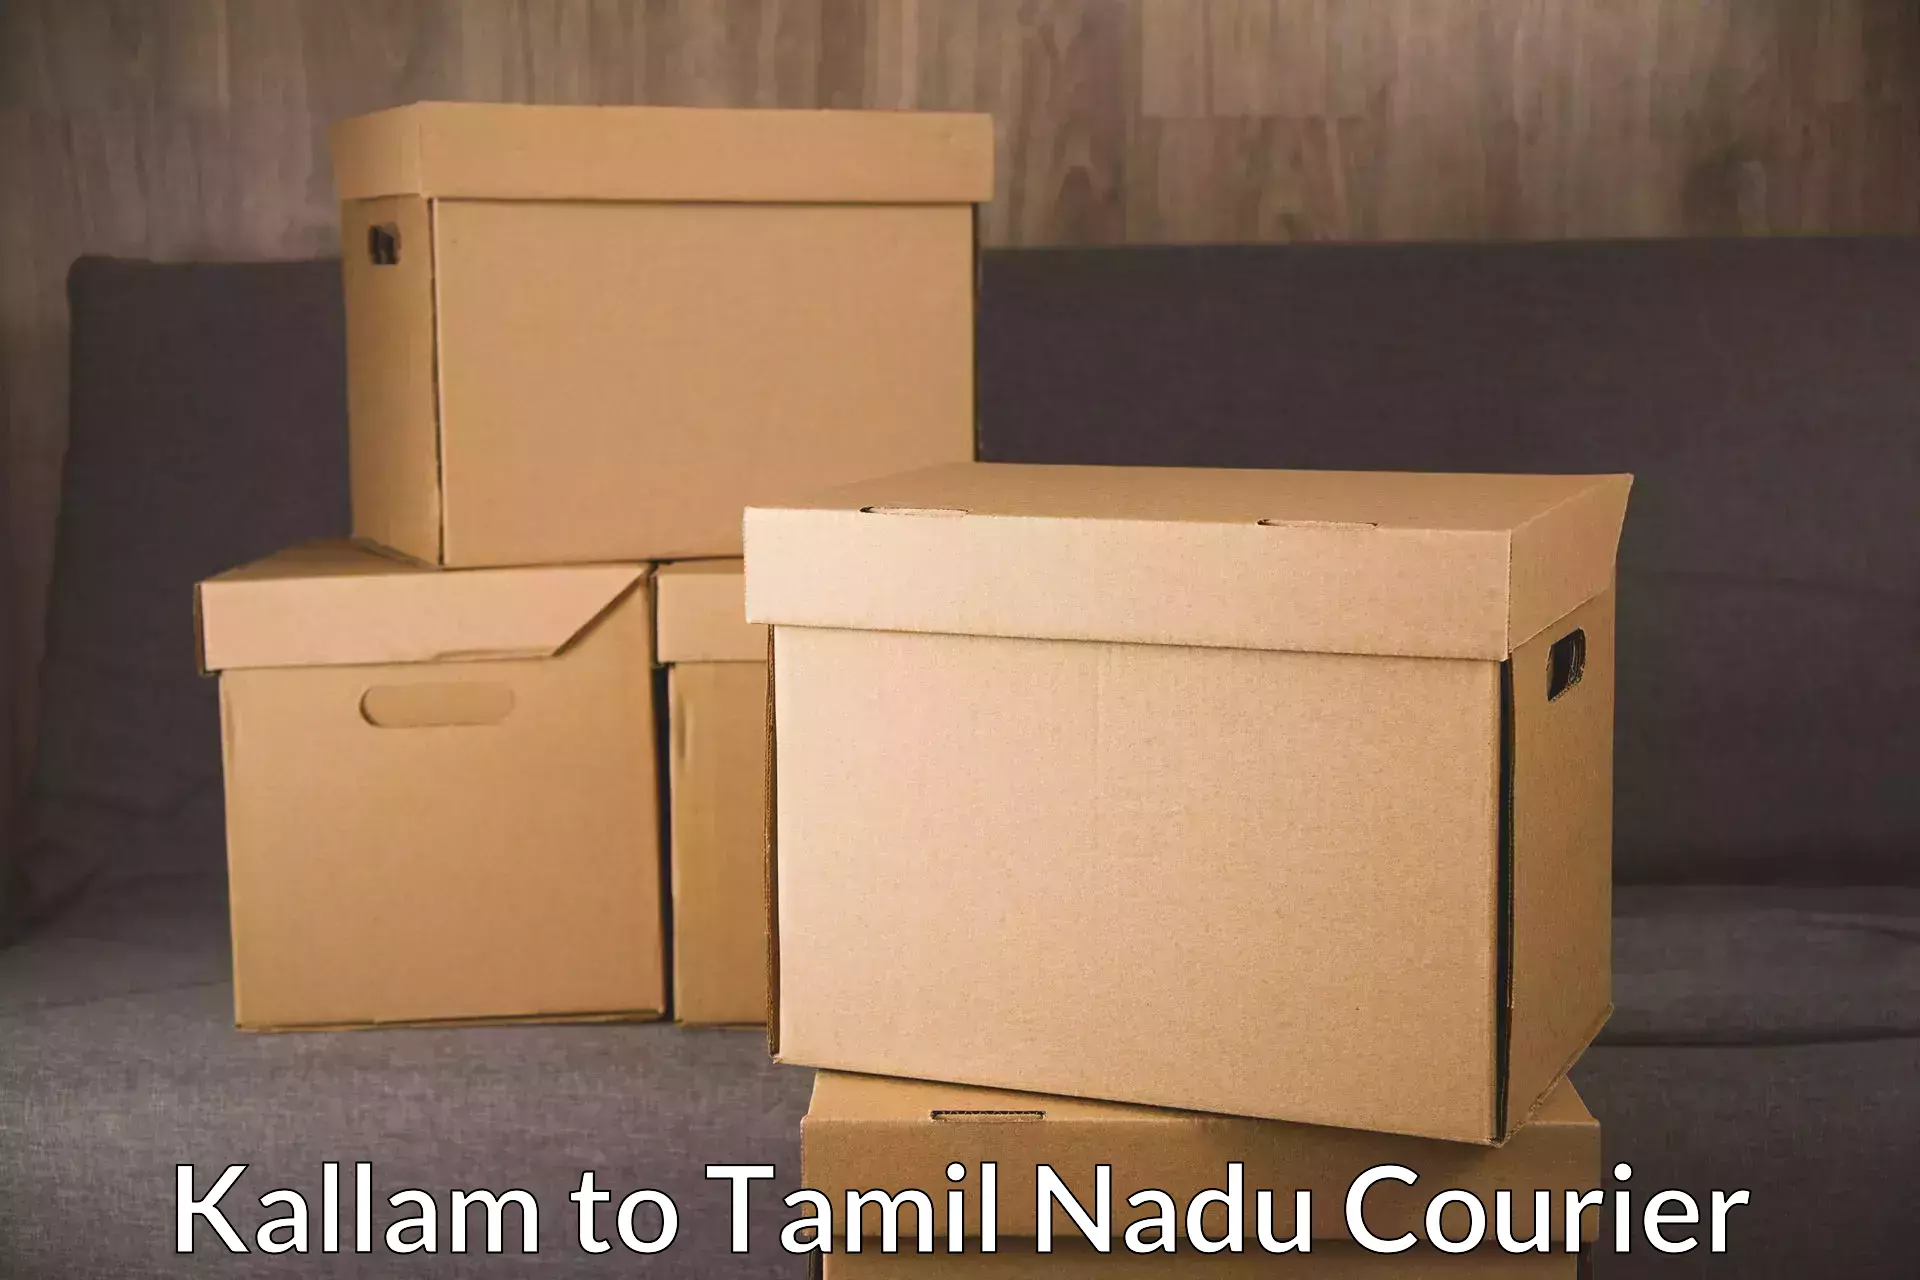 Reliable courier service Kallam to Dindigul